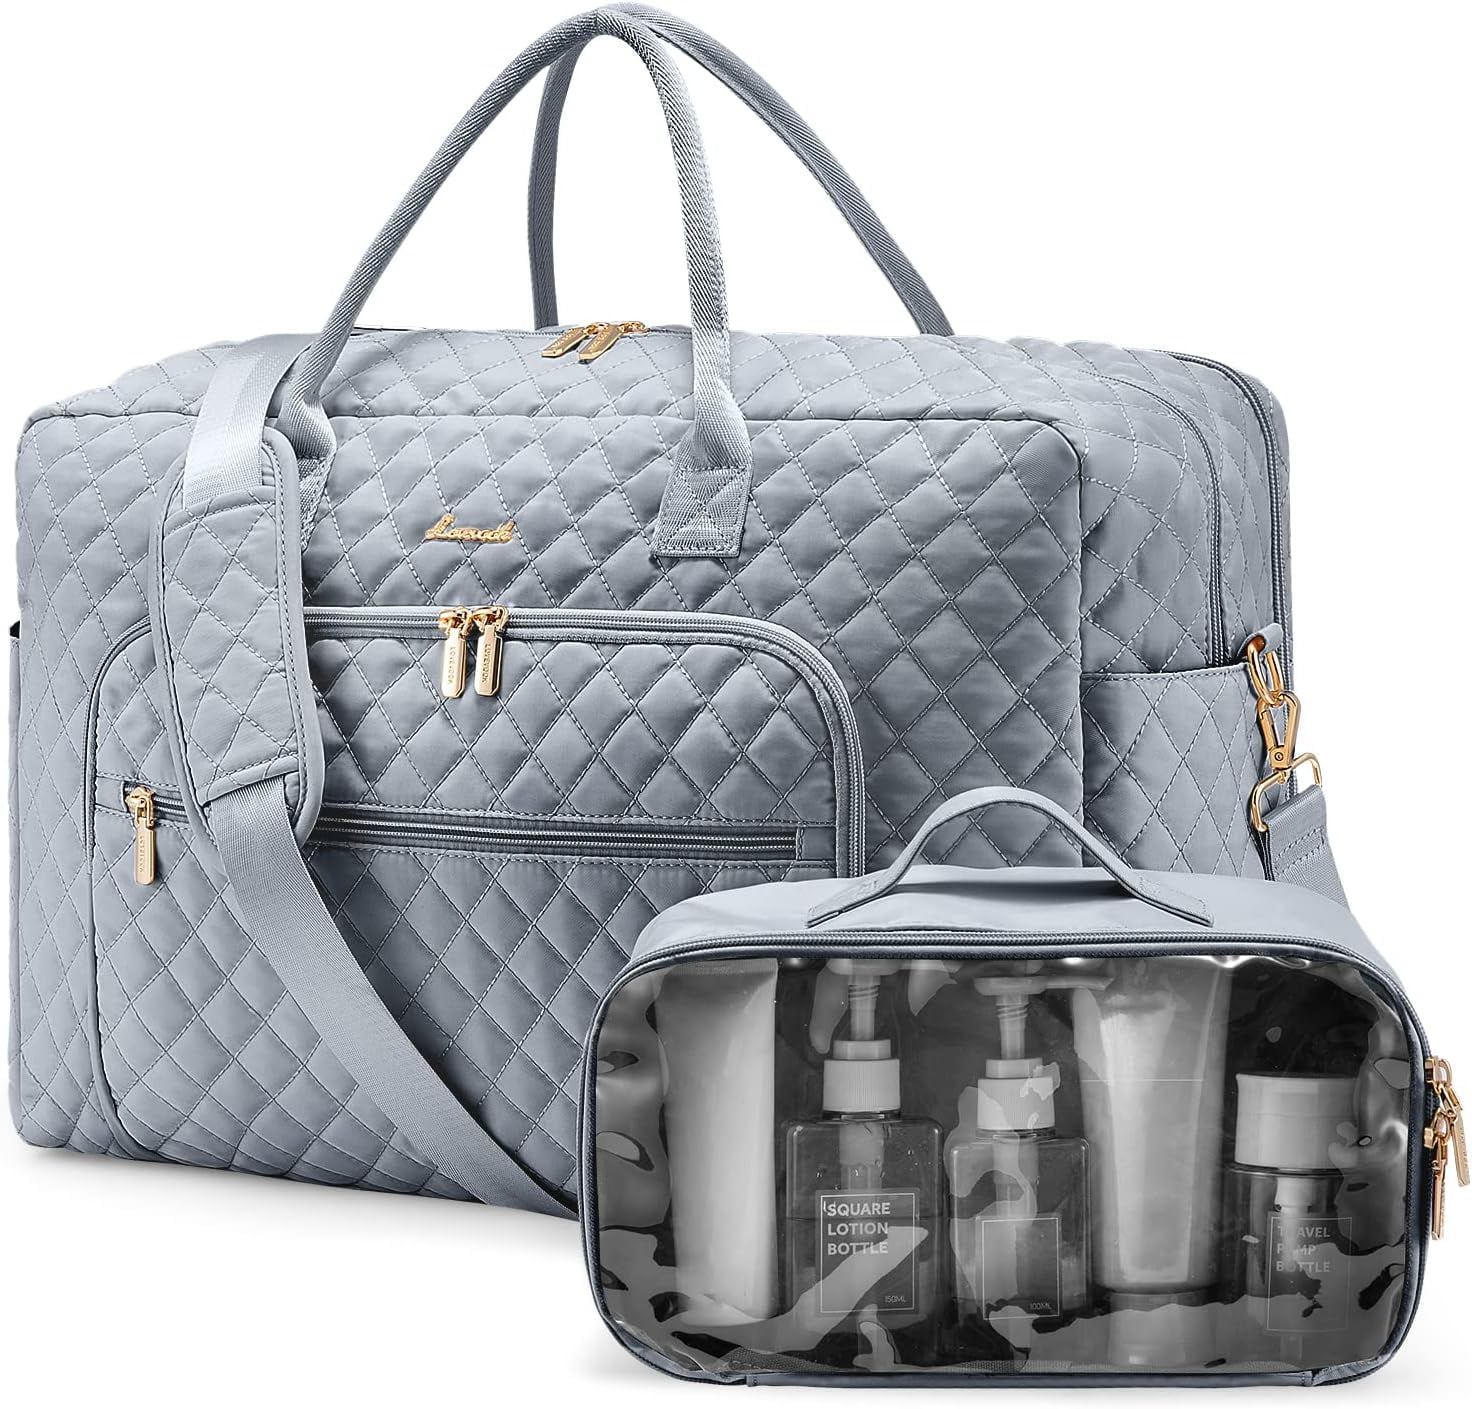 Gym Bag for Women, Duffle Bag with Toiletry Bag with Wet Pocket